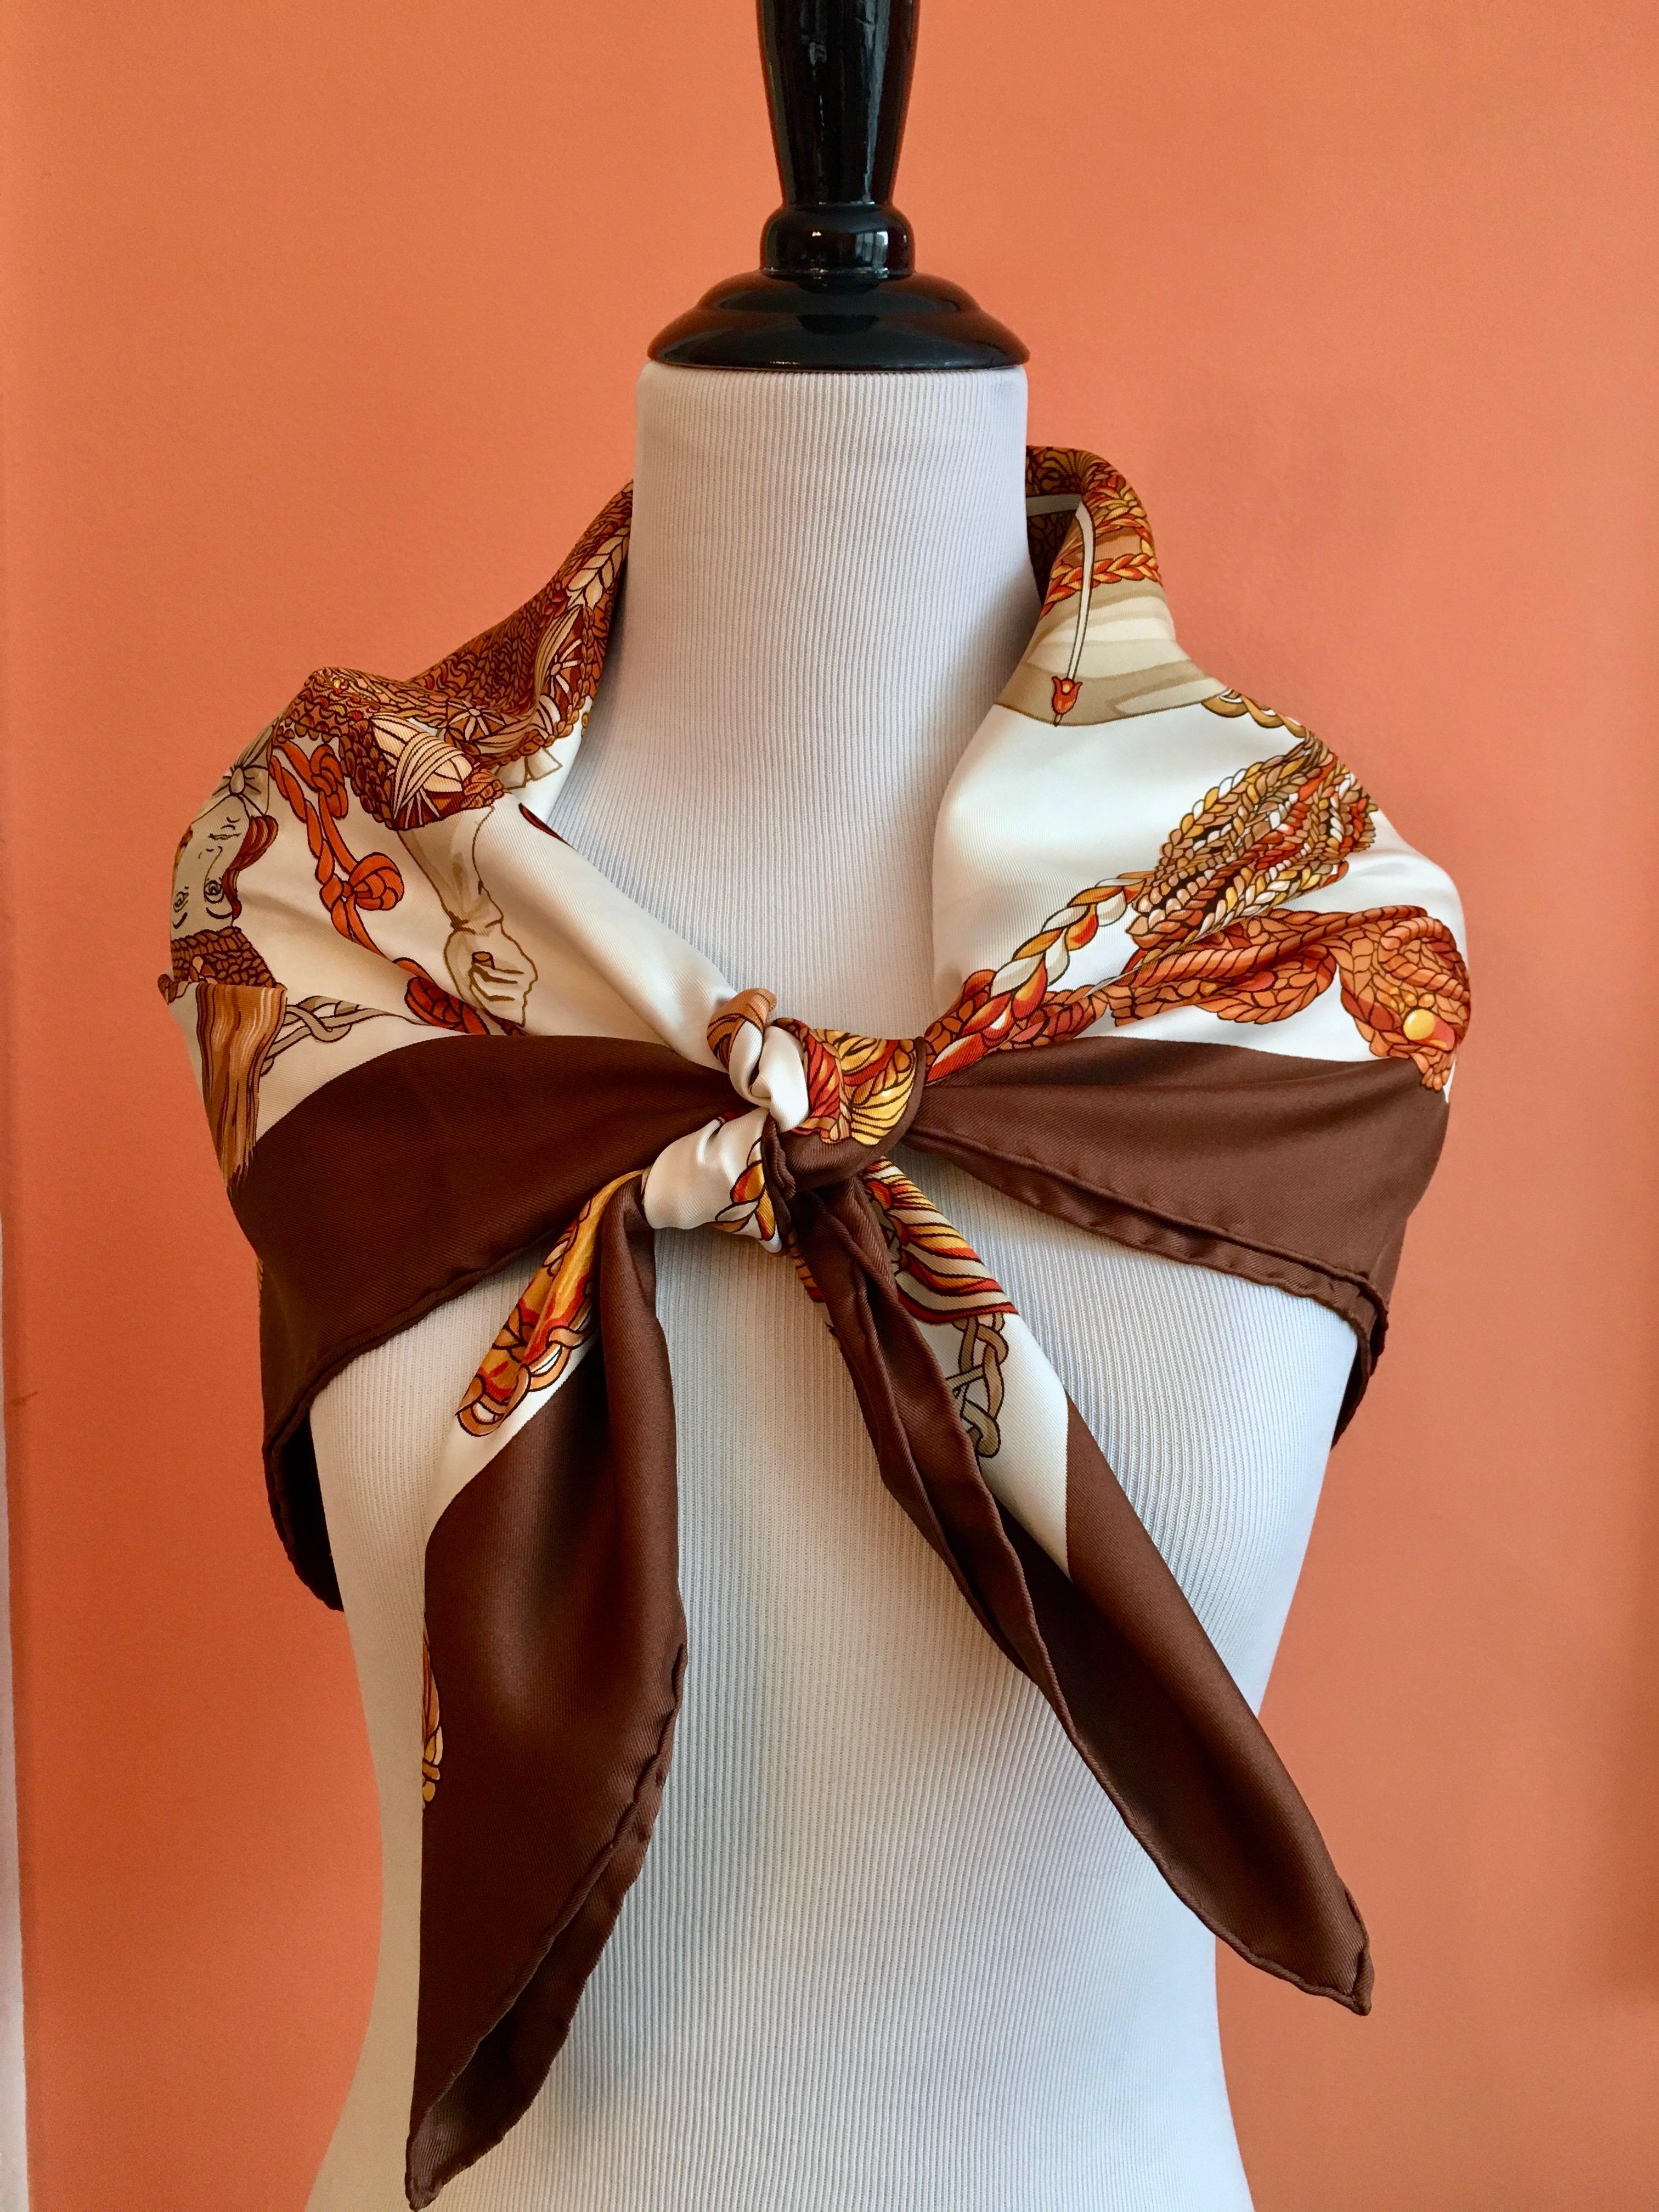 Brown Hermes Scarf Le Timbalier by Francoise Heron 1961 in Box 90cm